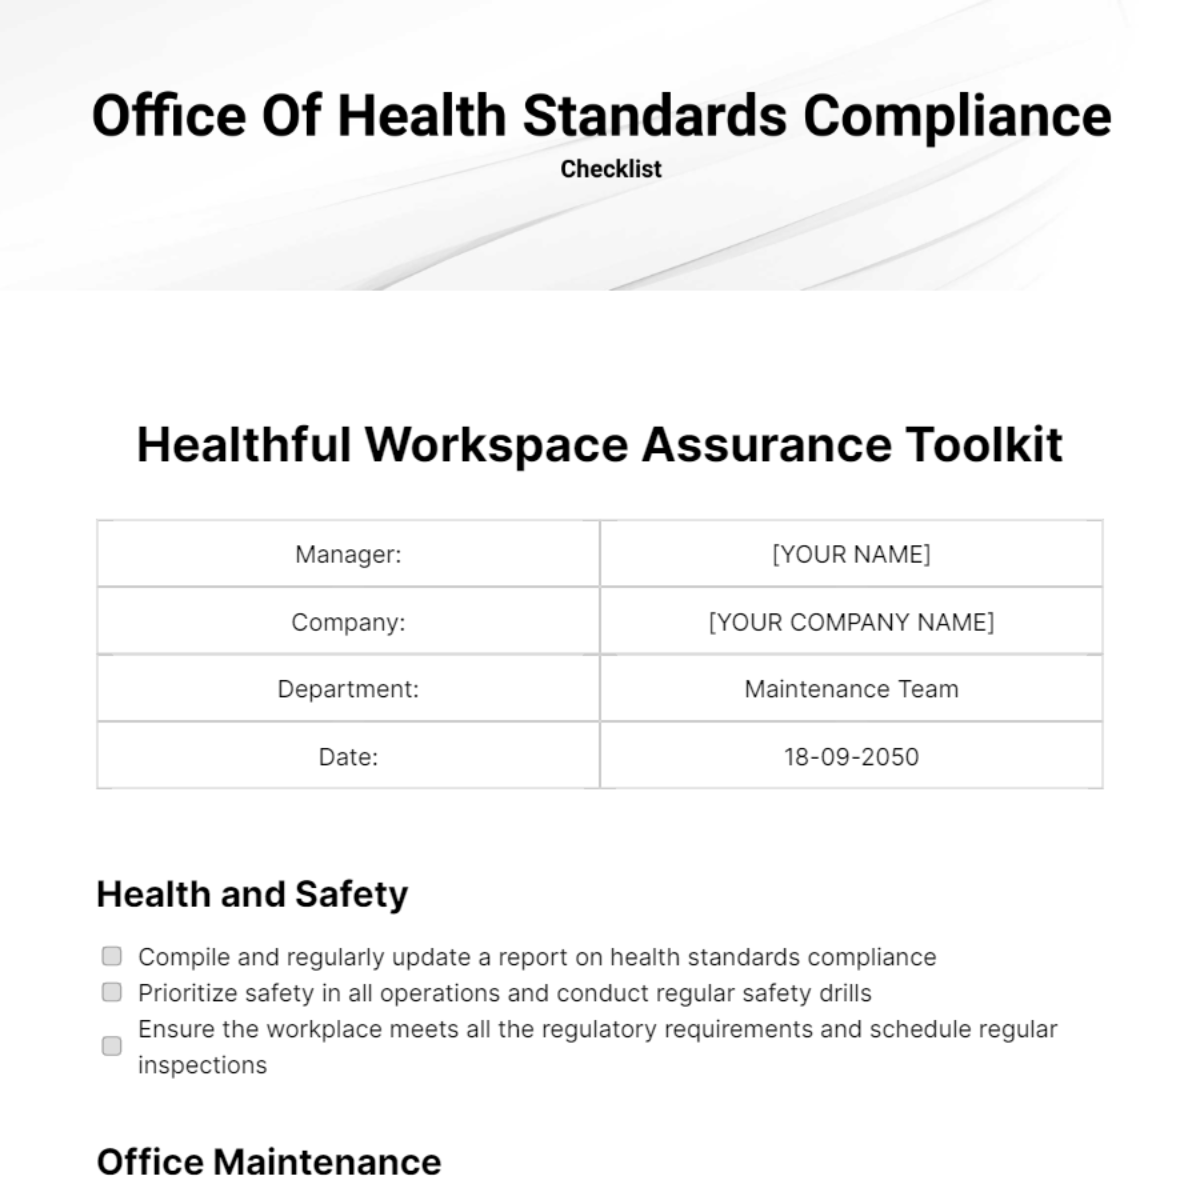 Office of Health Standards Compliance Checklist Template